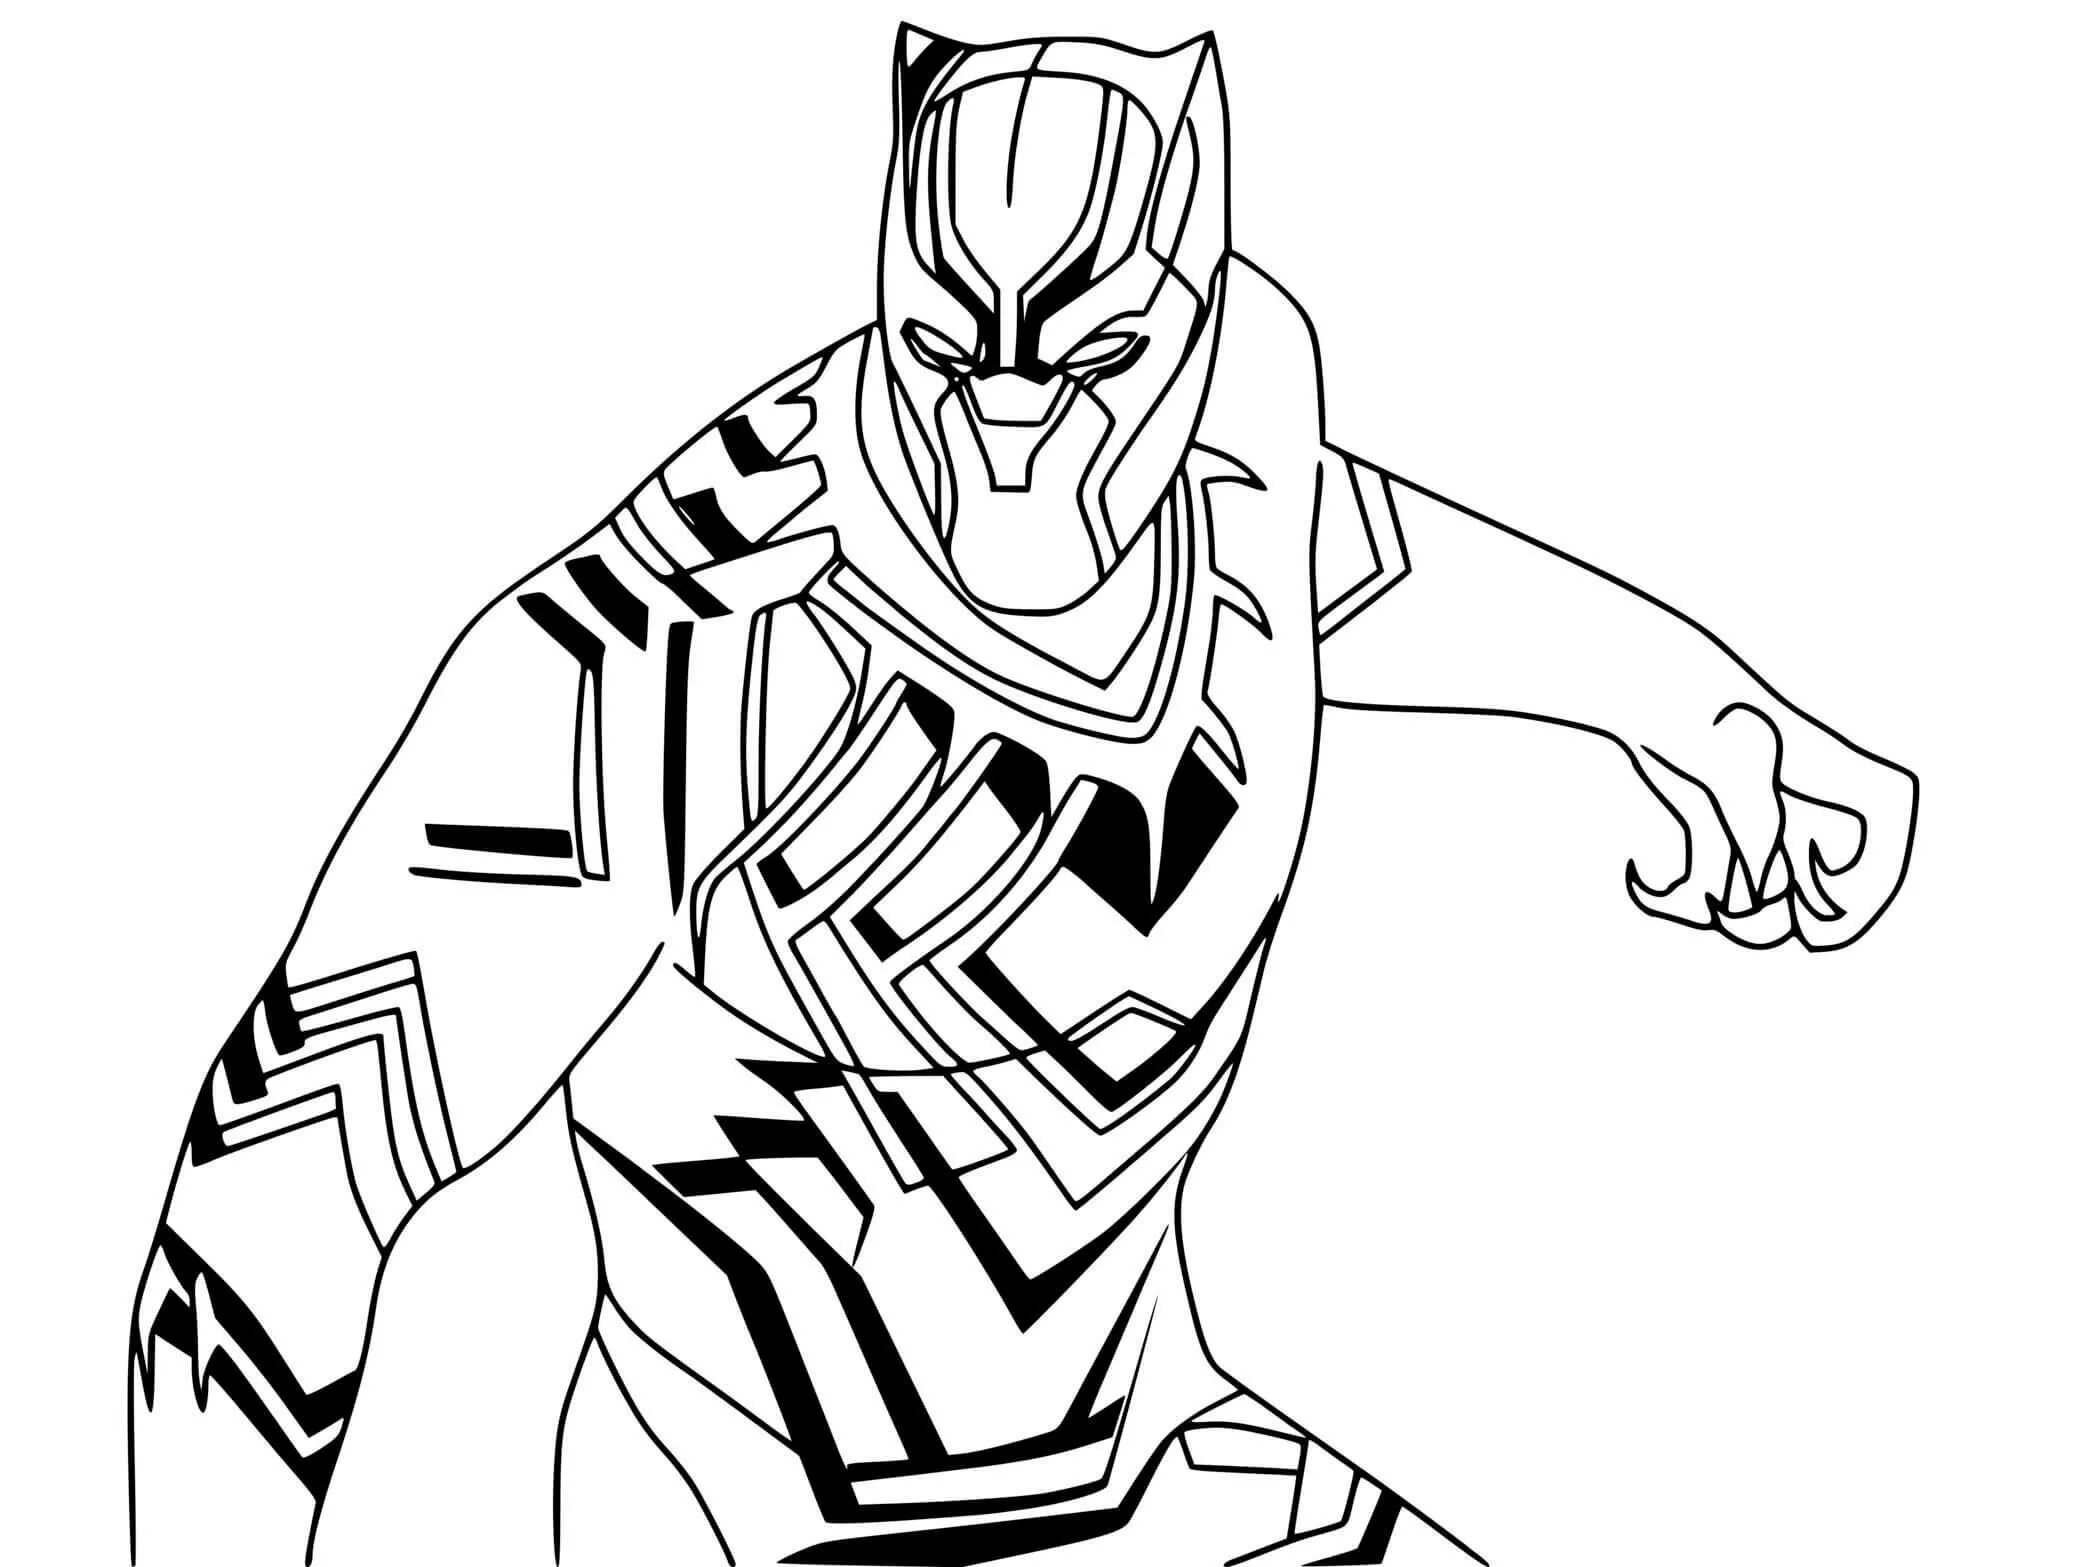 Attractive panther superhero coloring book